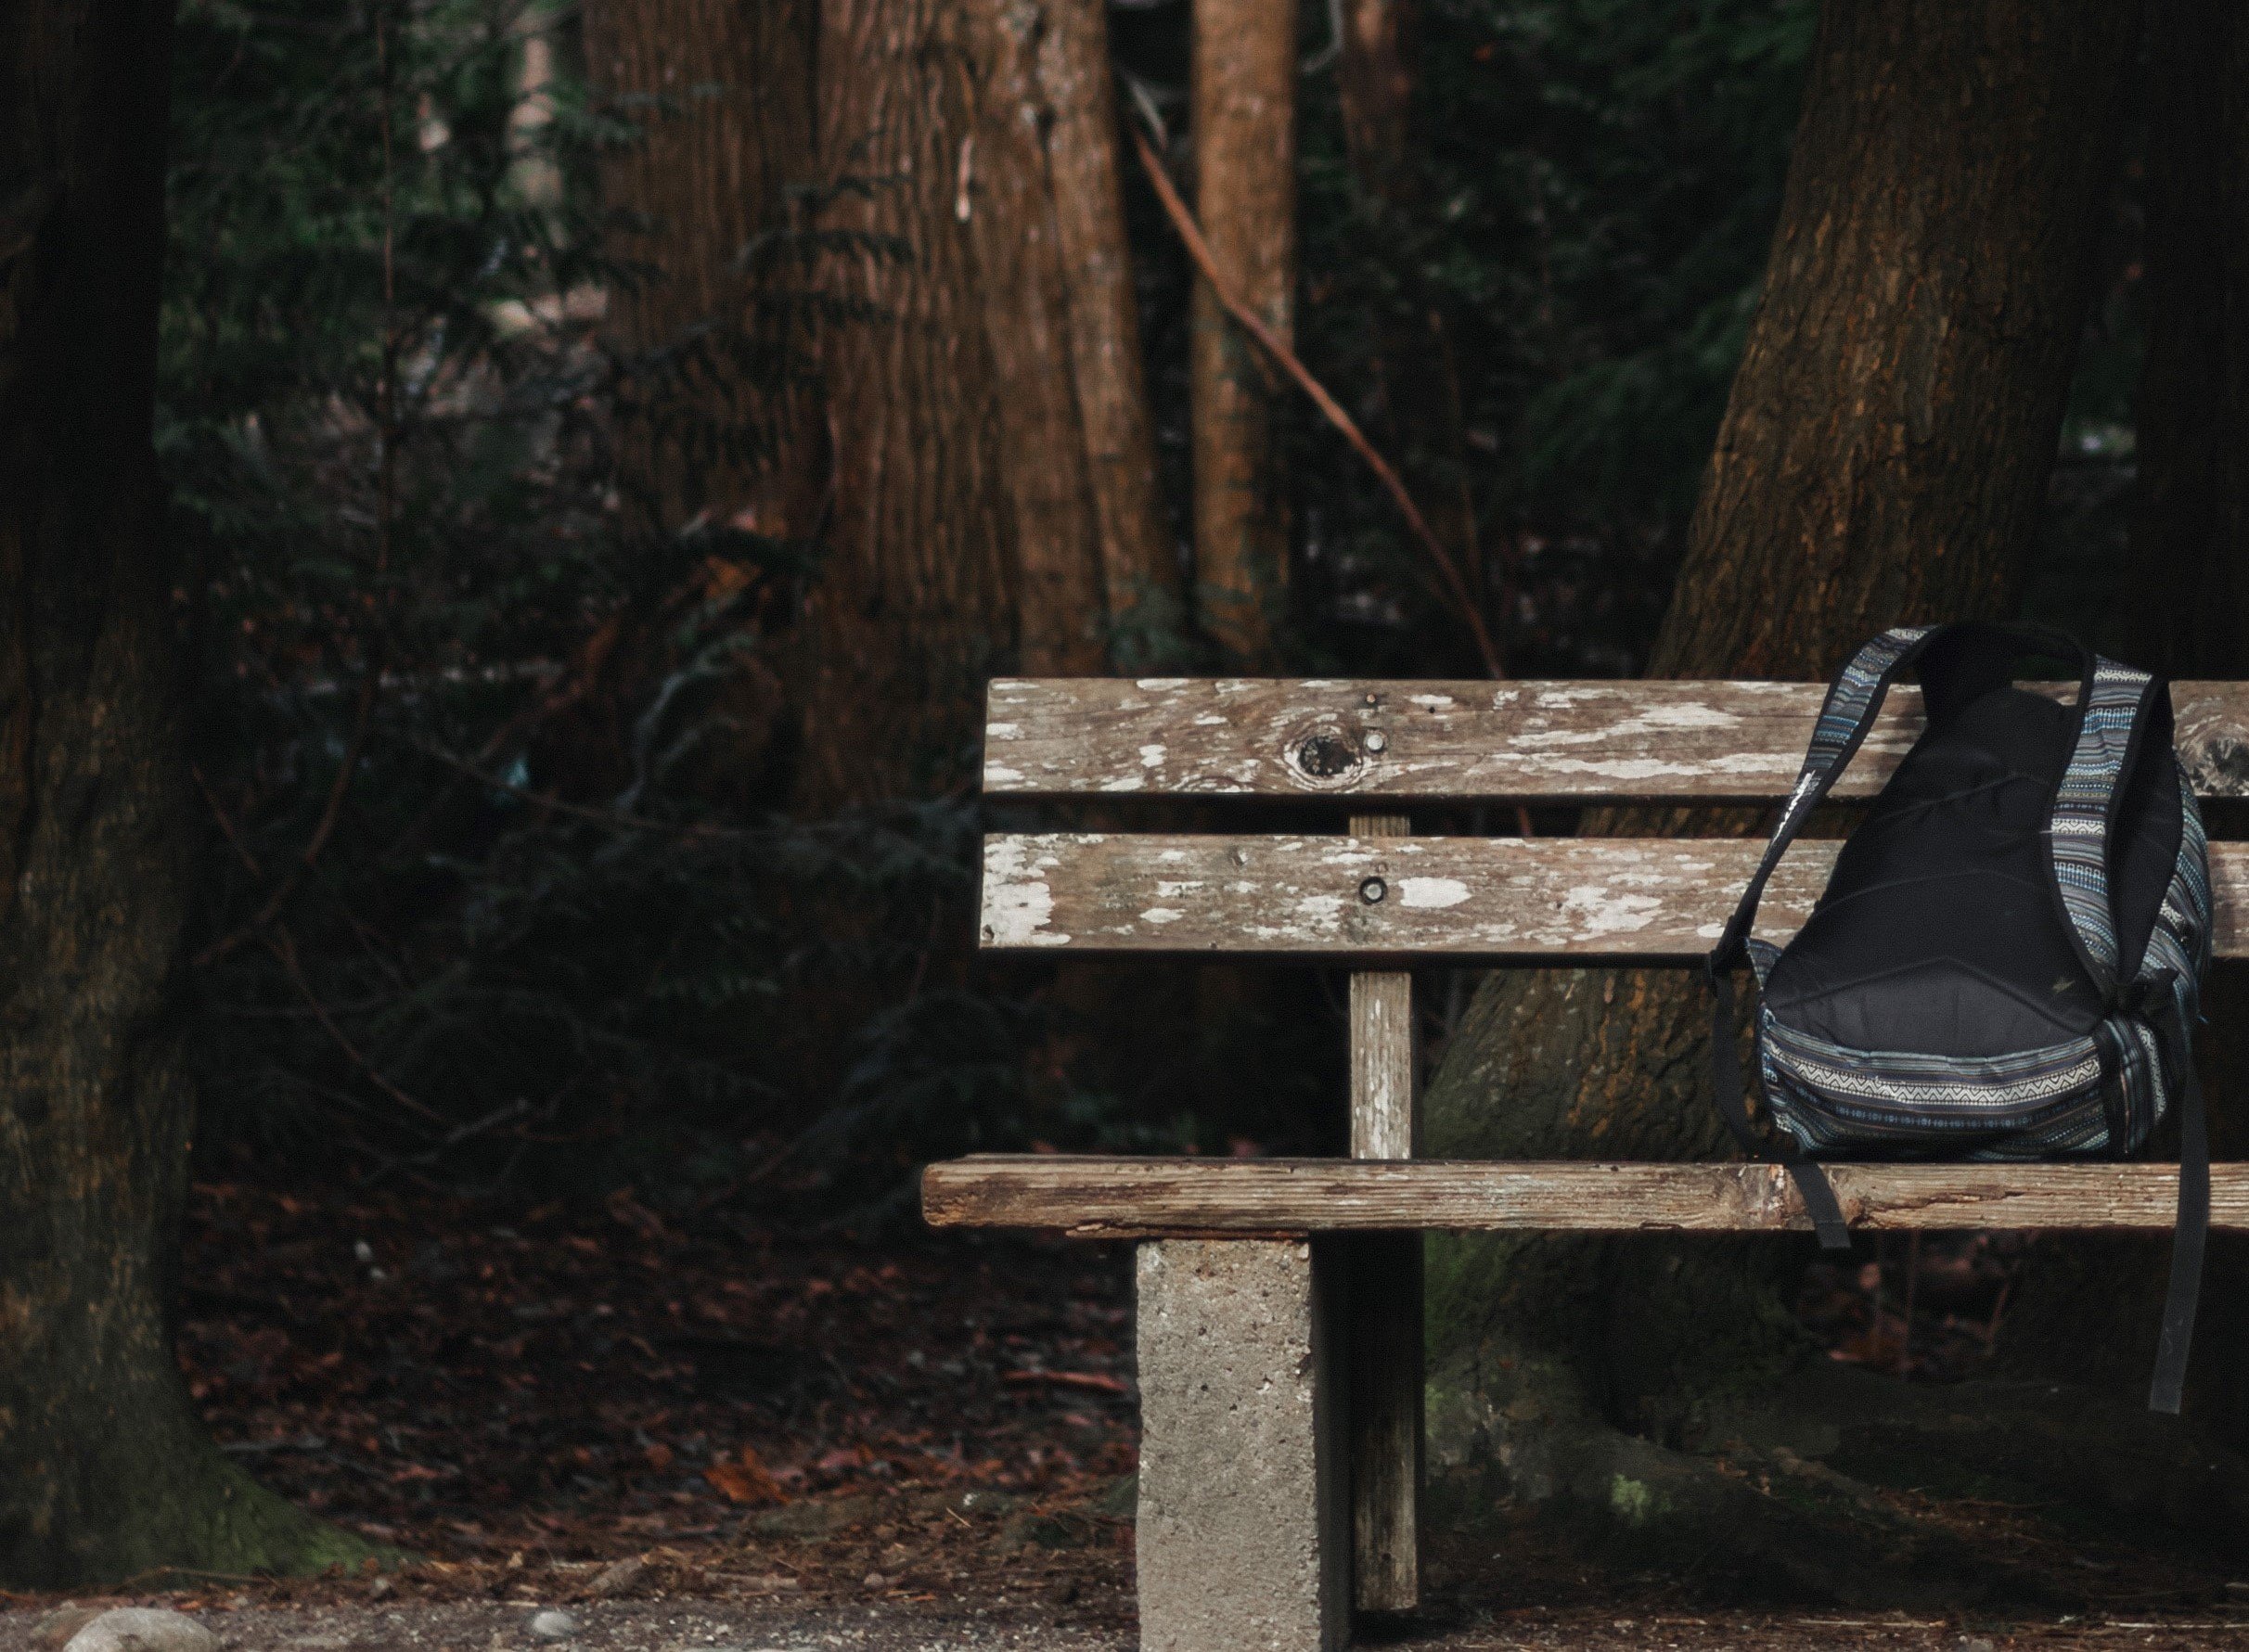 Karen found a backpack on a bench & searched for the owner's address. | Source: Unsplash